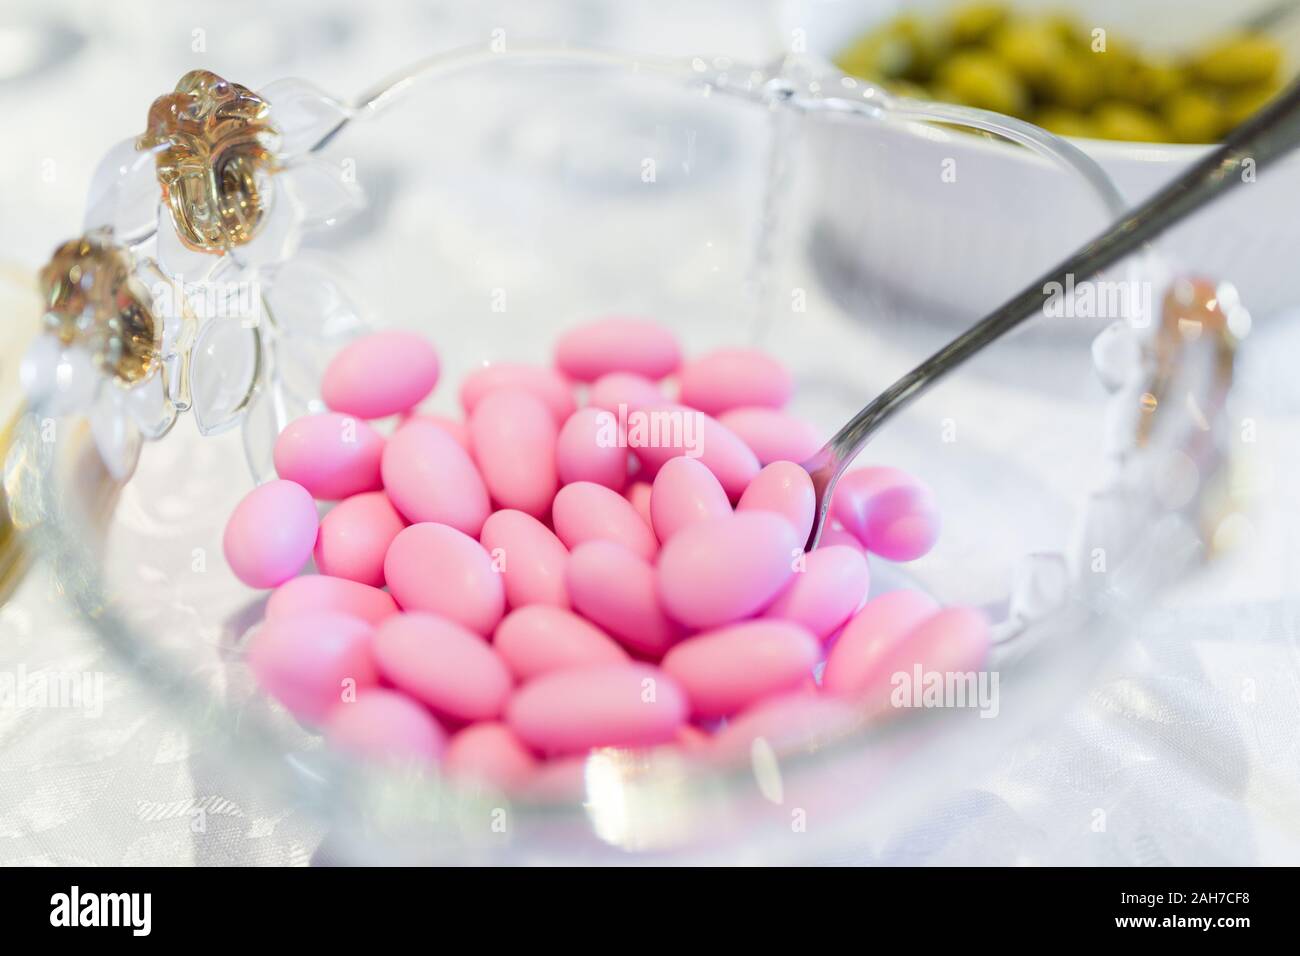 Close up of a glass cup with pink Jordan almonds and a teaspoon, against a bokeh background Stock Photo